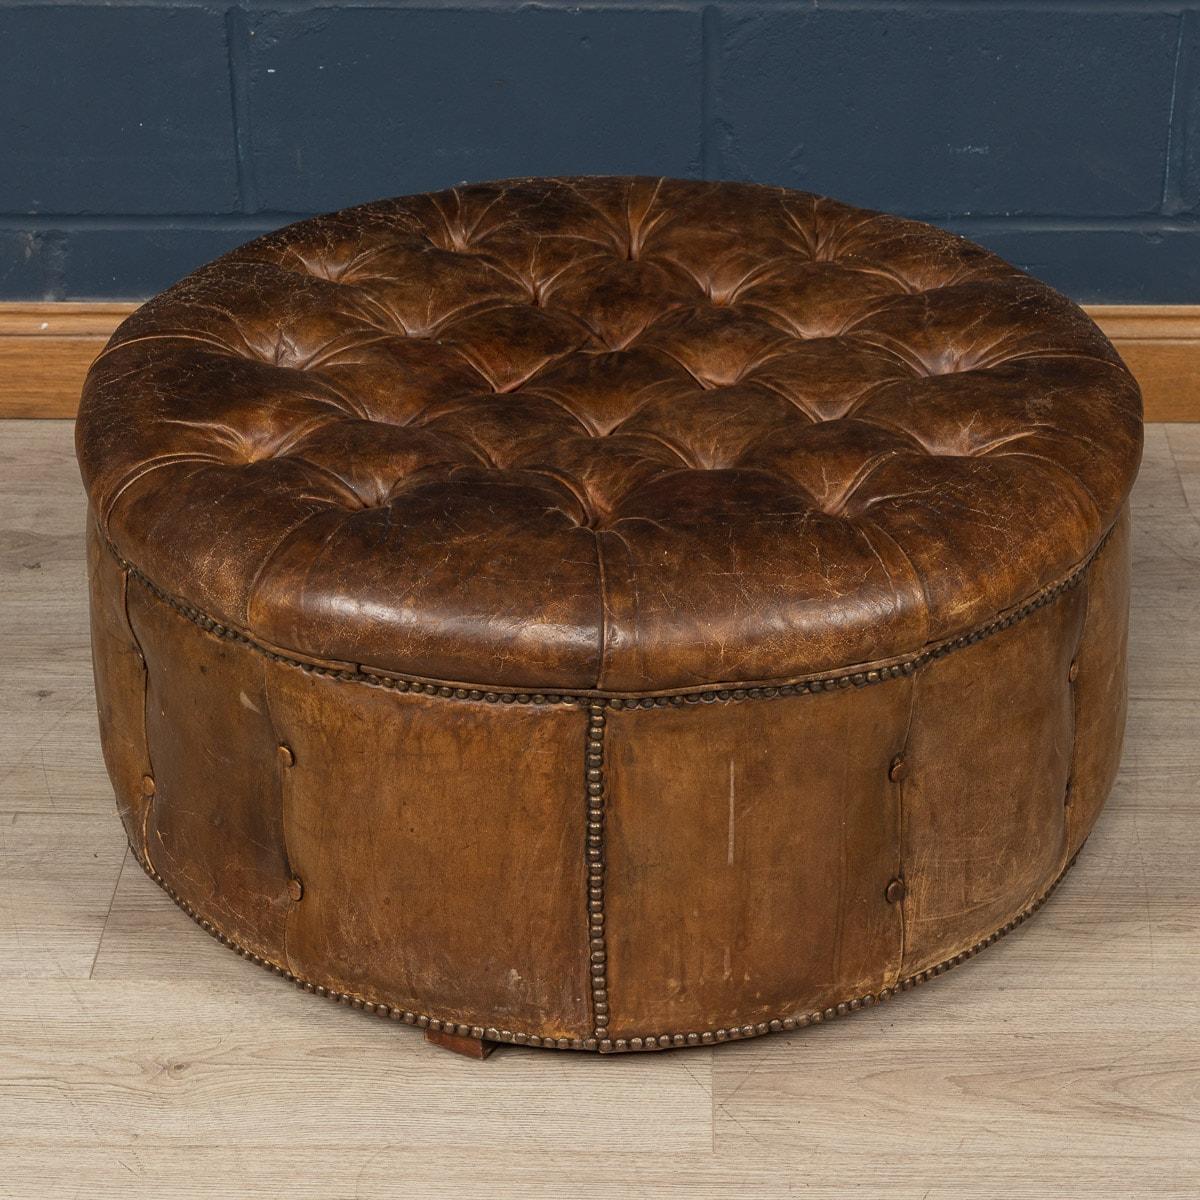 Superb early to mid 20th century leather Chesterfield-style footstool or ottoman. This is a fashionable item of furniture capable of uplifting the interior space of any contemporary or traditional home, the classic colour combining refined elegance